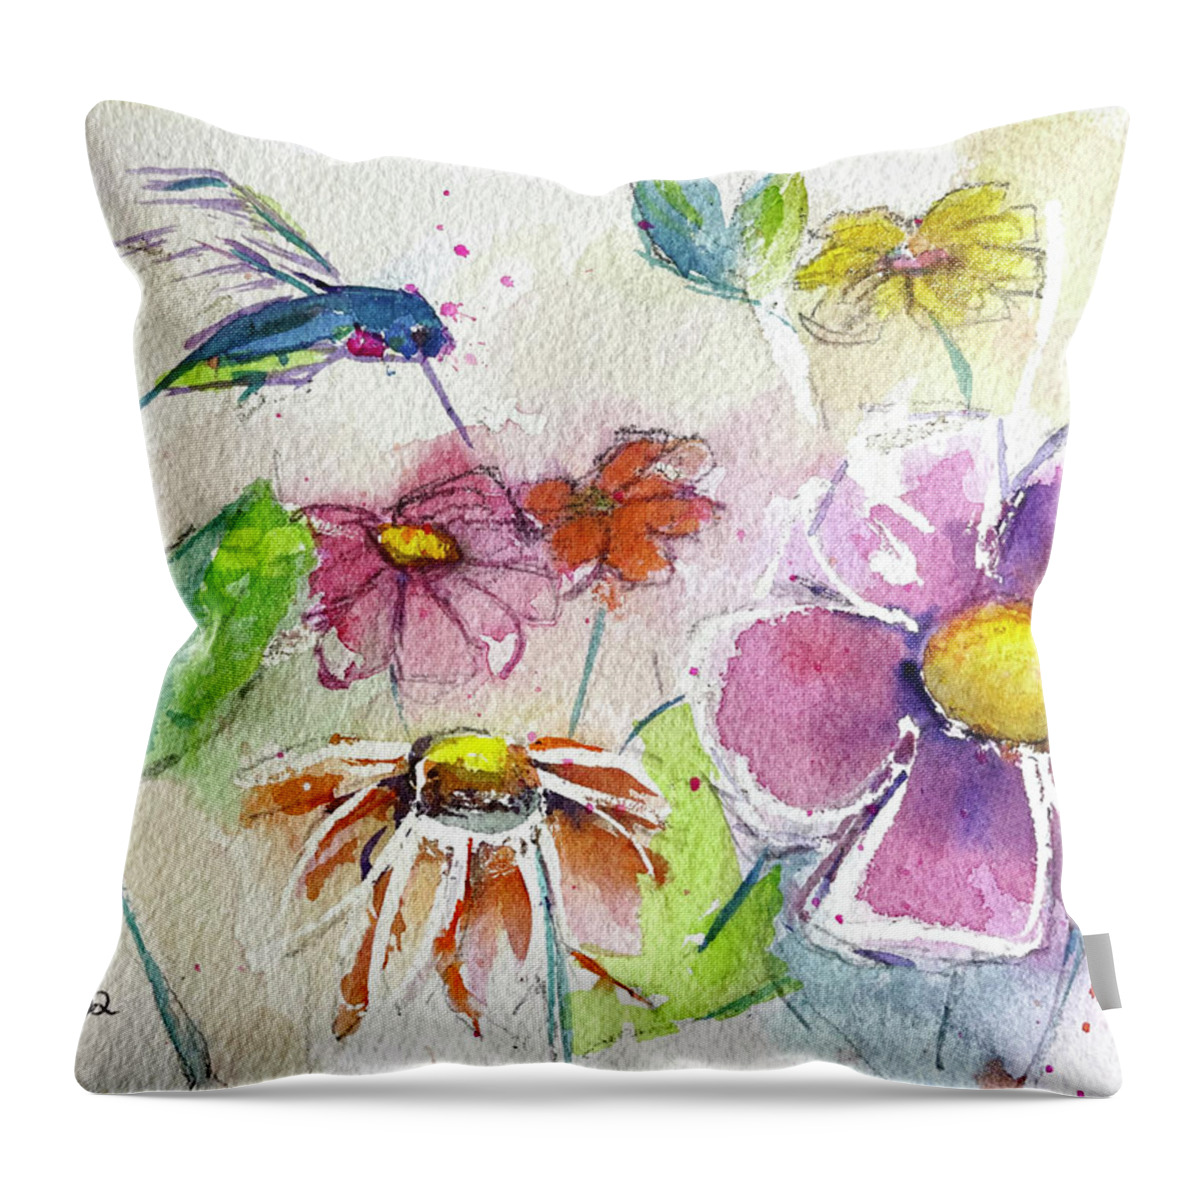 Watercolor Throw Pillow featuring the painting Hummingbird in the Garden by Roxy Rich